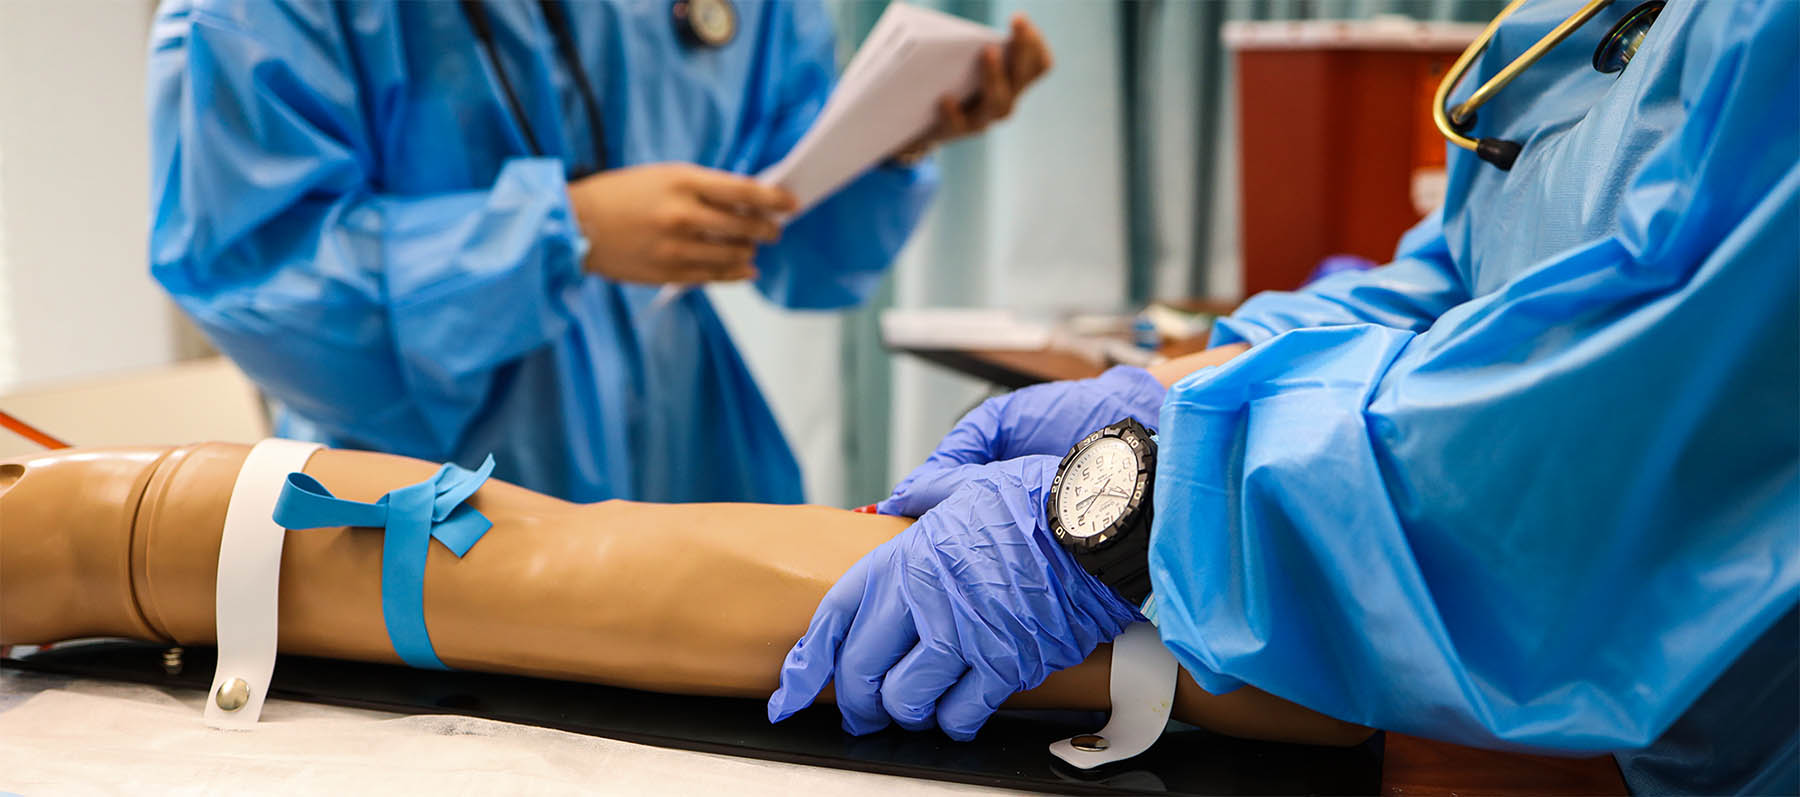 A closeup of a nursing student's hands with gloves holding a mannequin's arm that is wrapped in a tourniquet.